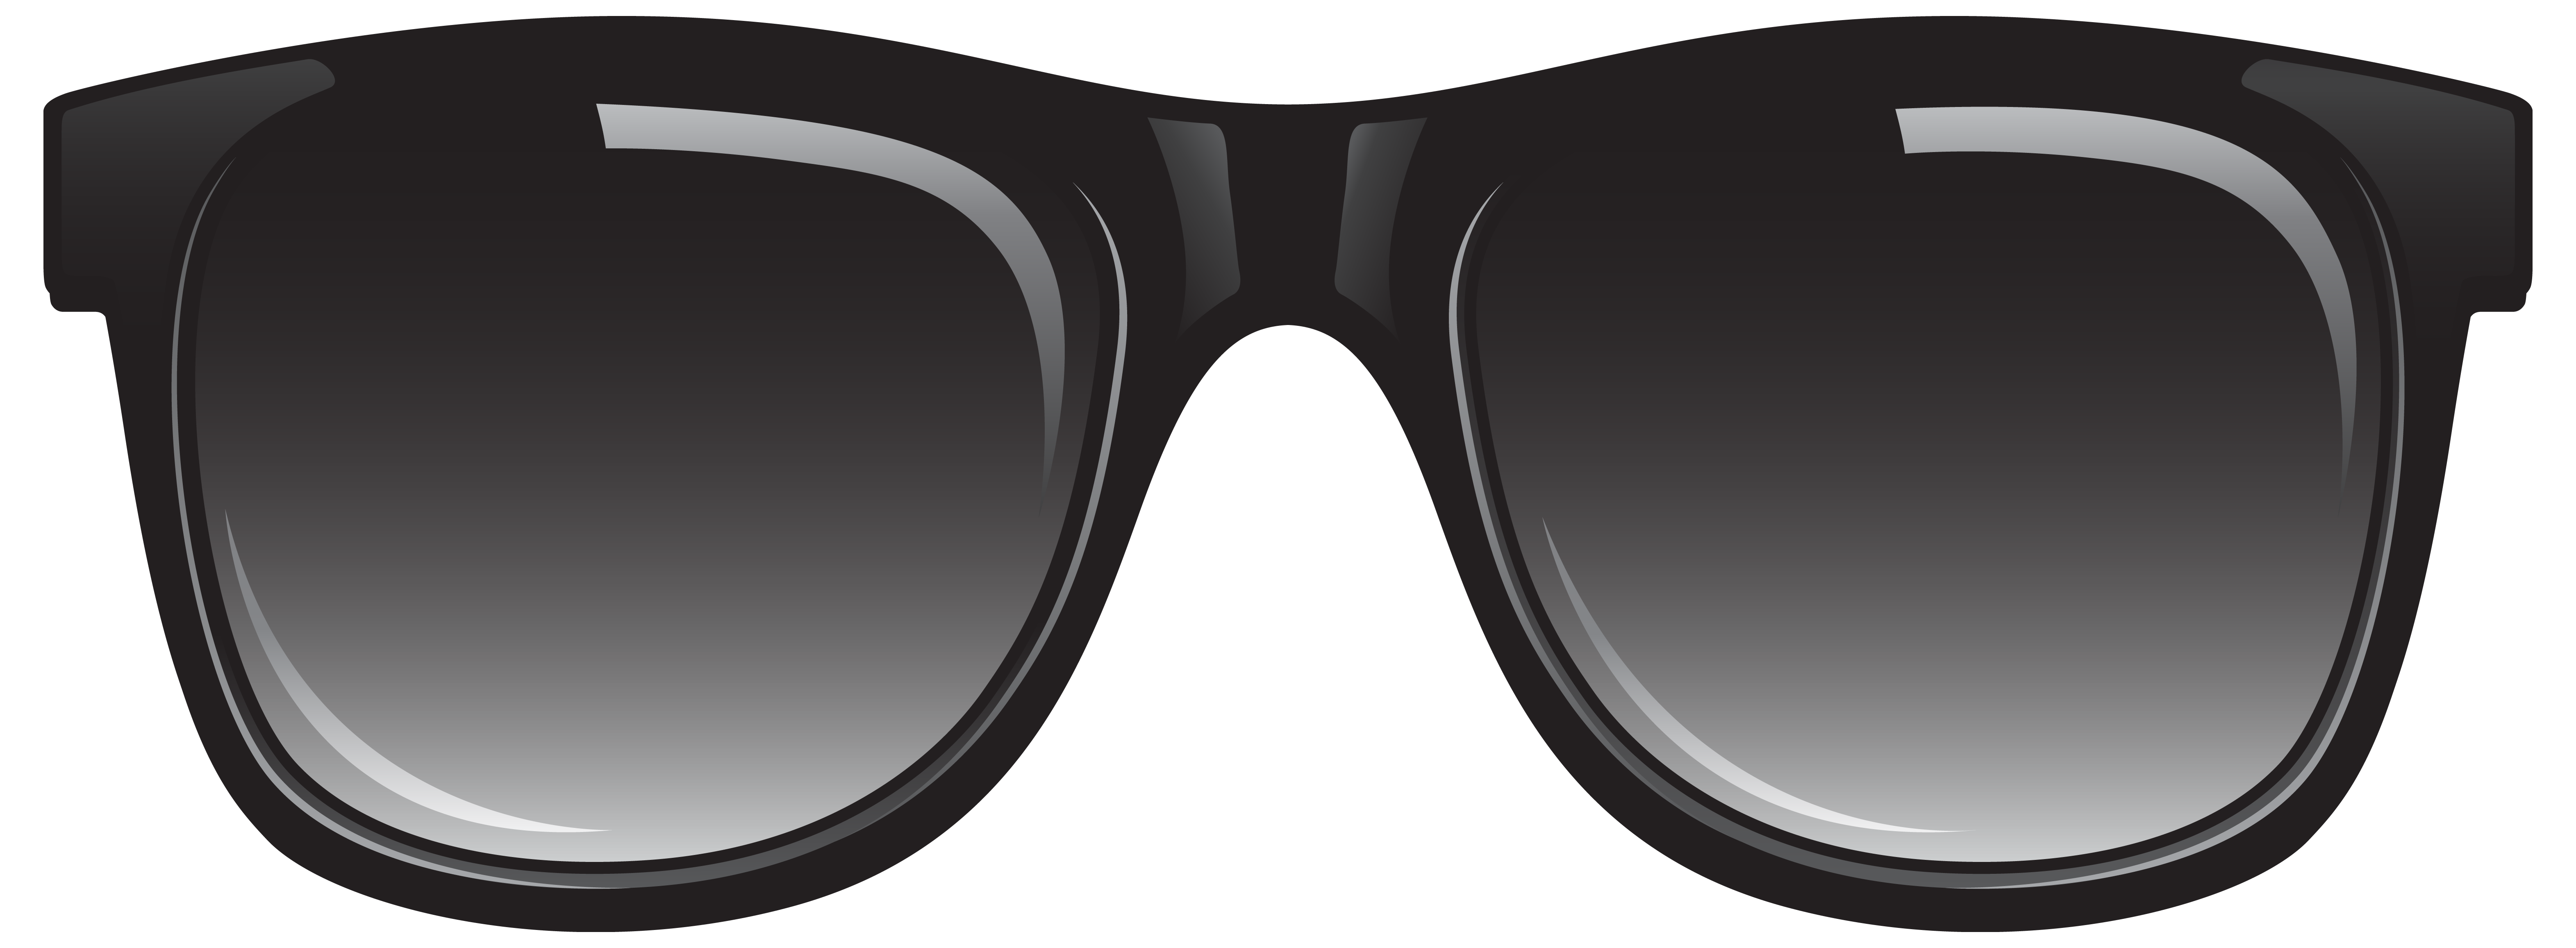 Free Transparent Background Sunglasses, Download Free Clip.